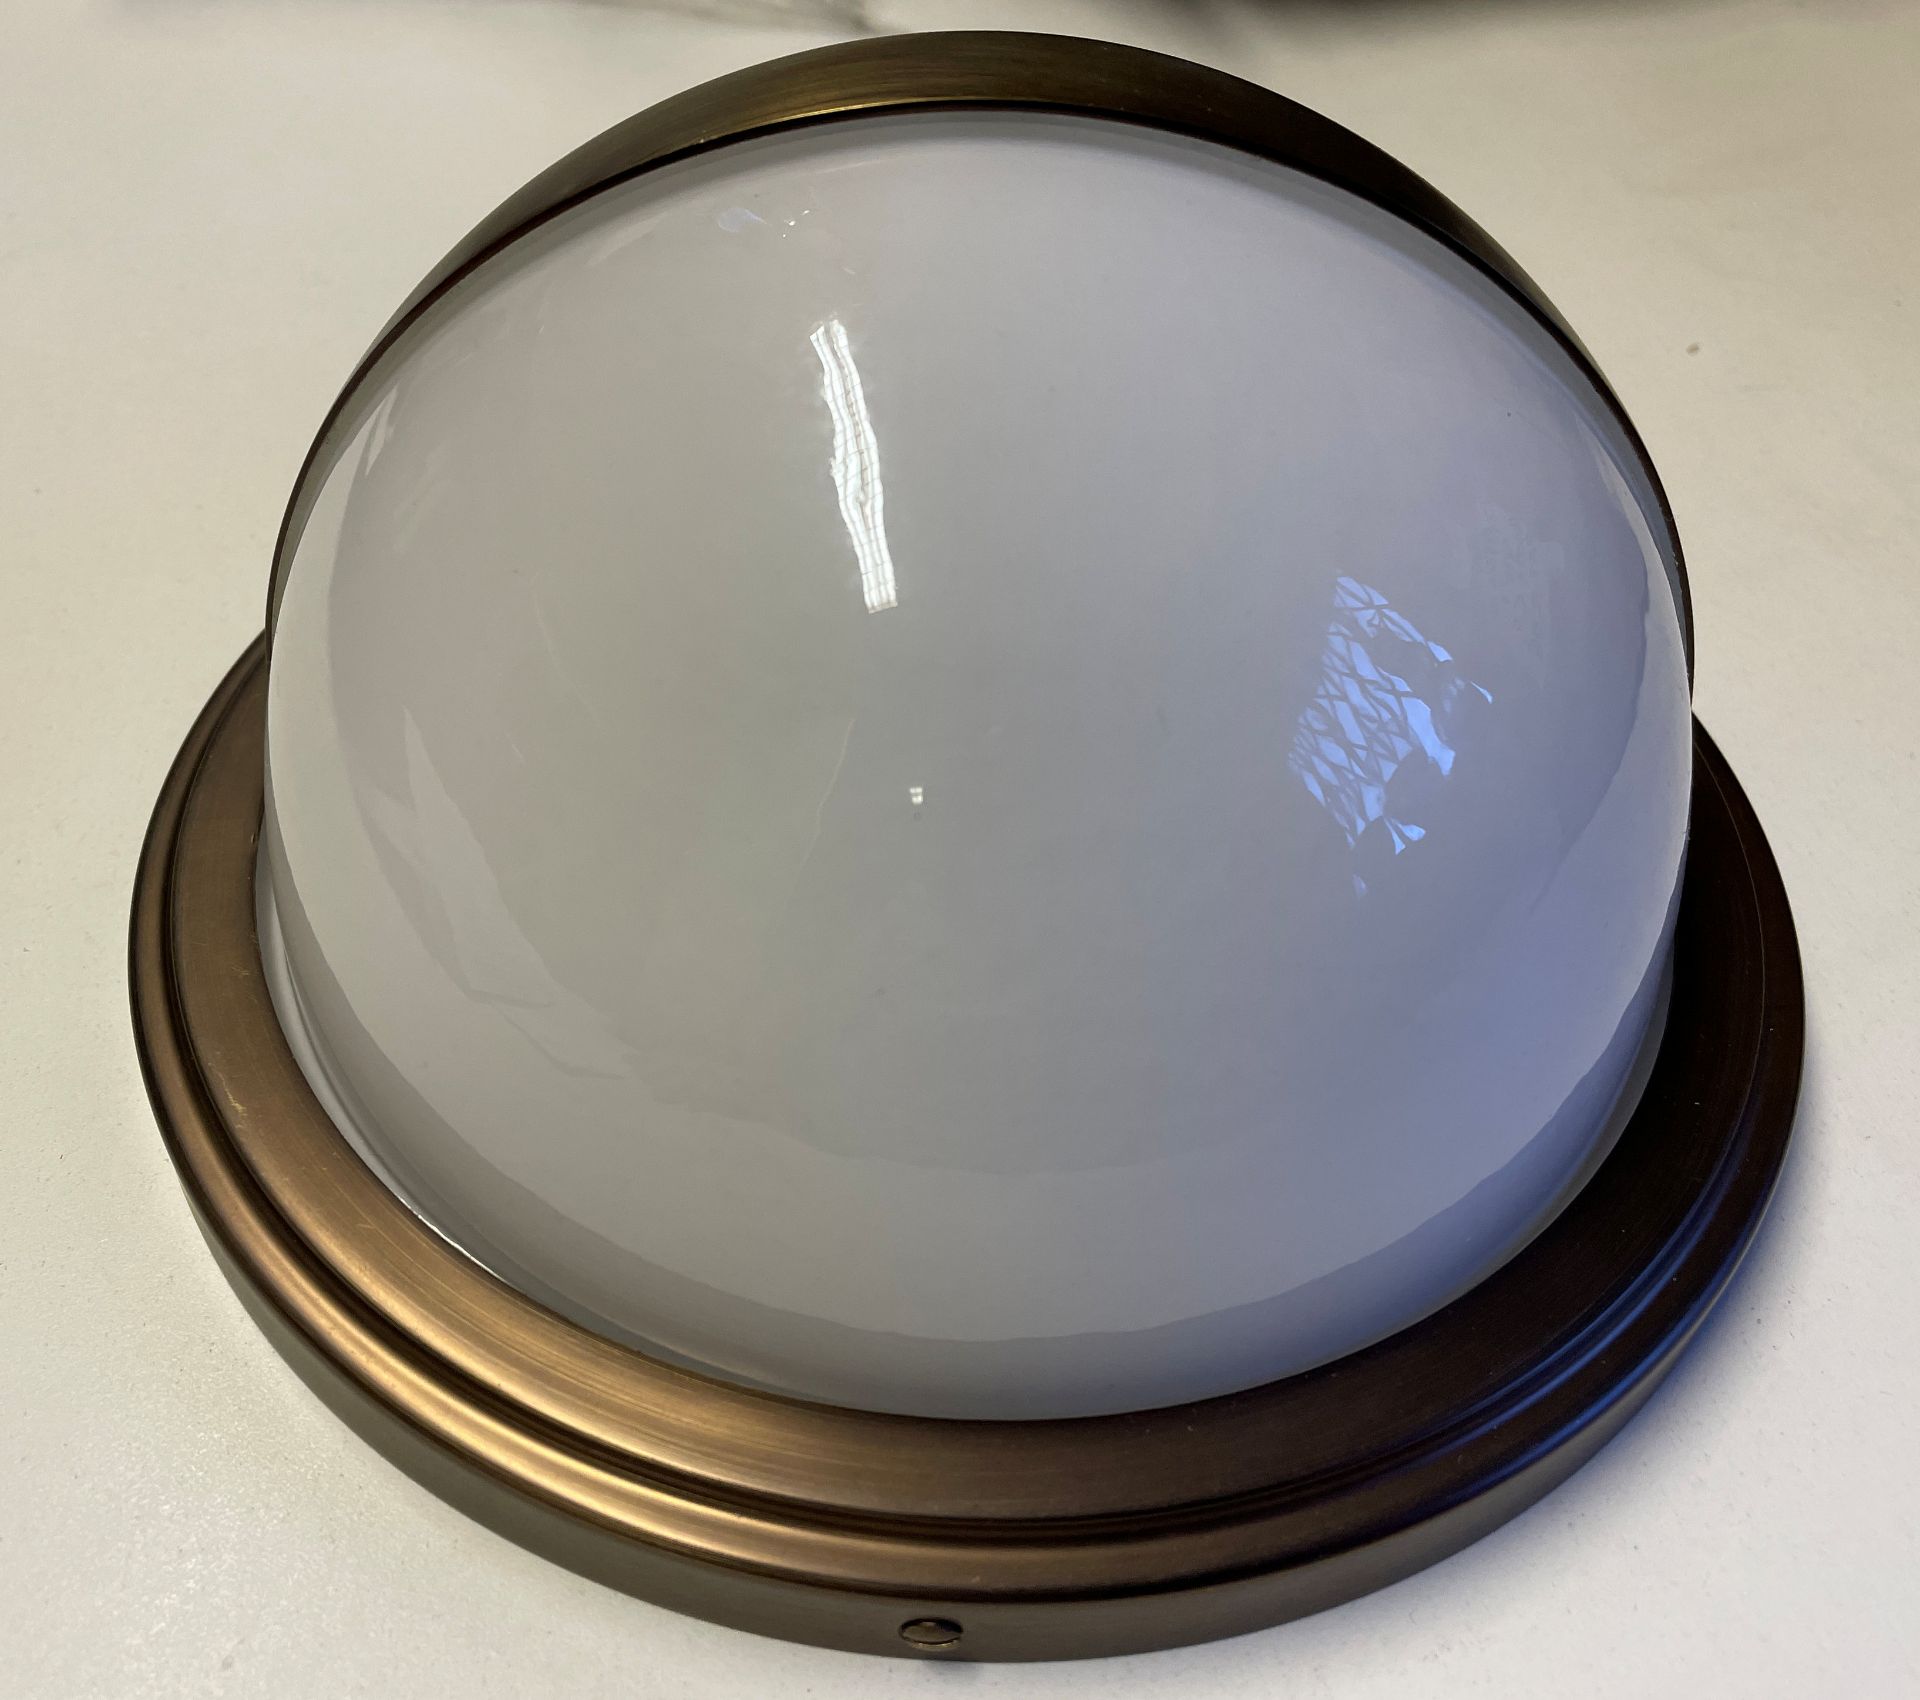 1 x Chelsom Brushed Brass Heavy Maritime style Wall lamp (20cm Diameter X 13cm depth) would look ju - Image 5 of 7